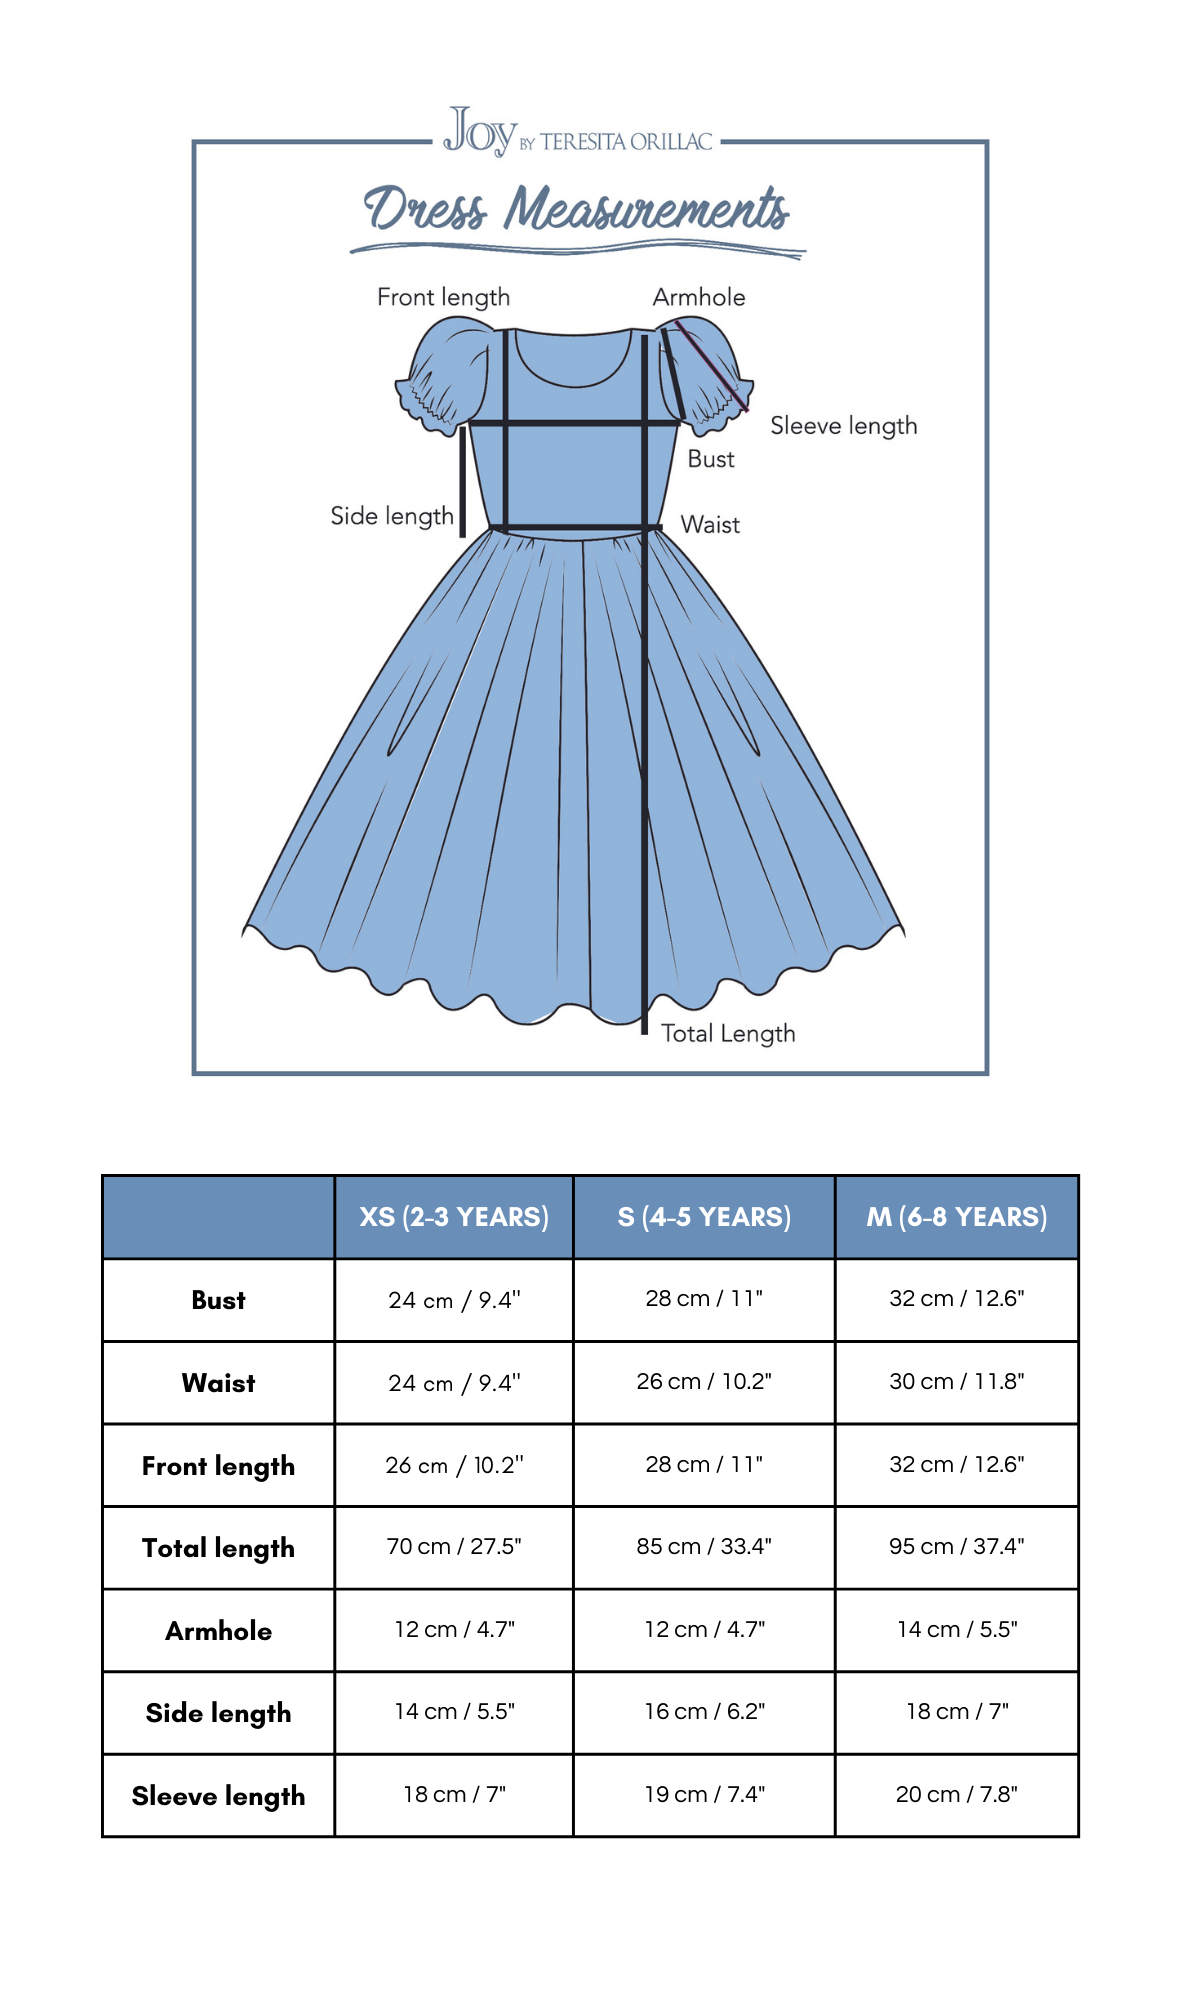 The Snowflake Queen Costume Dress